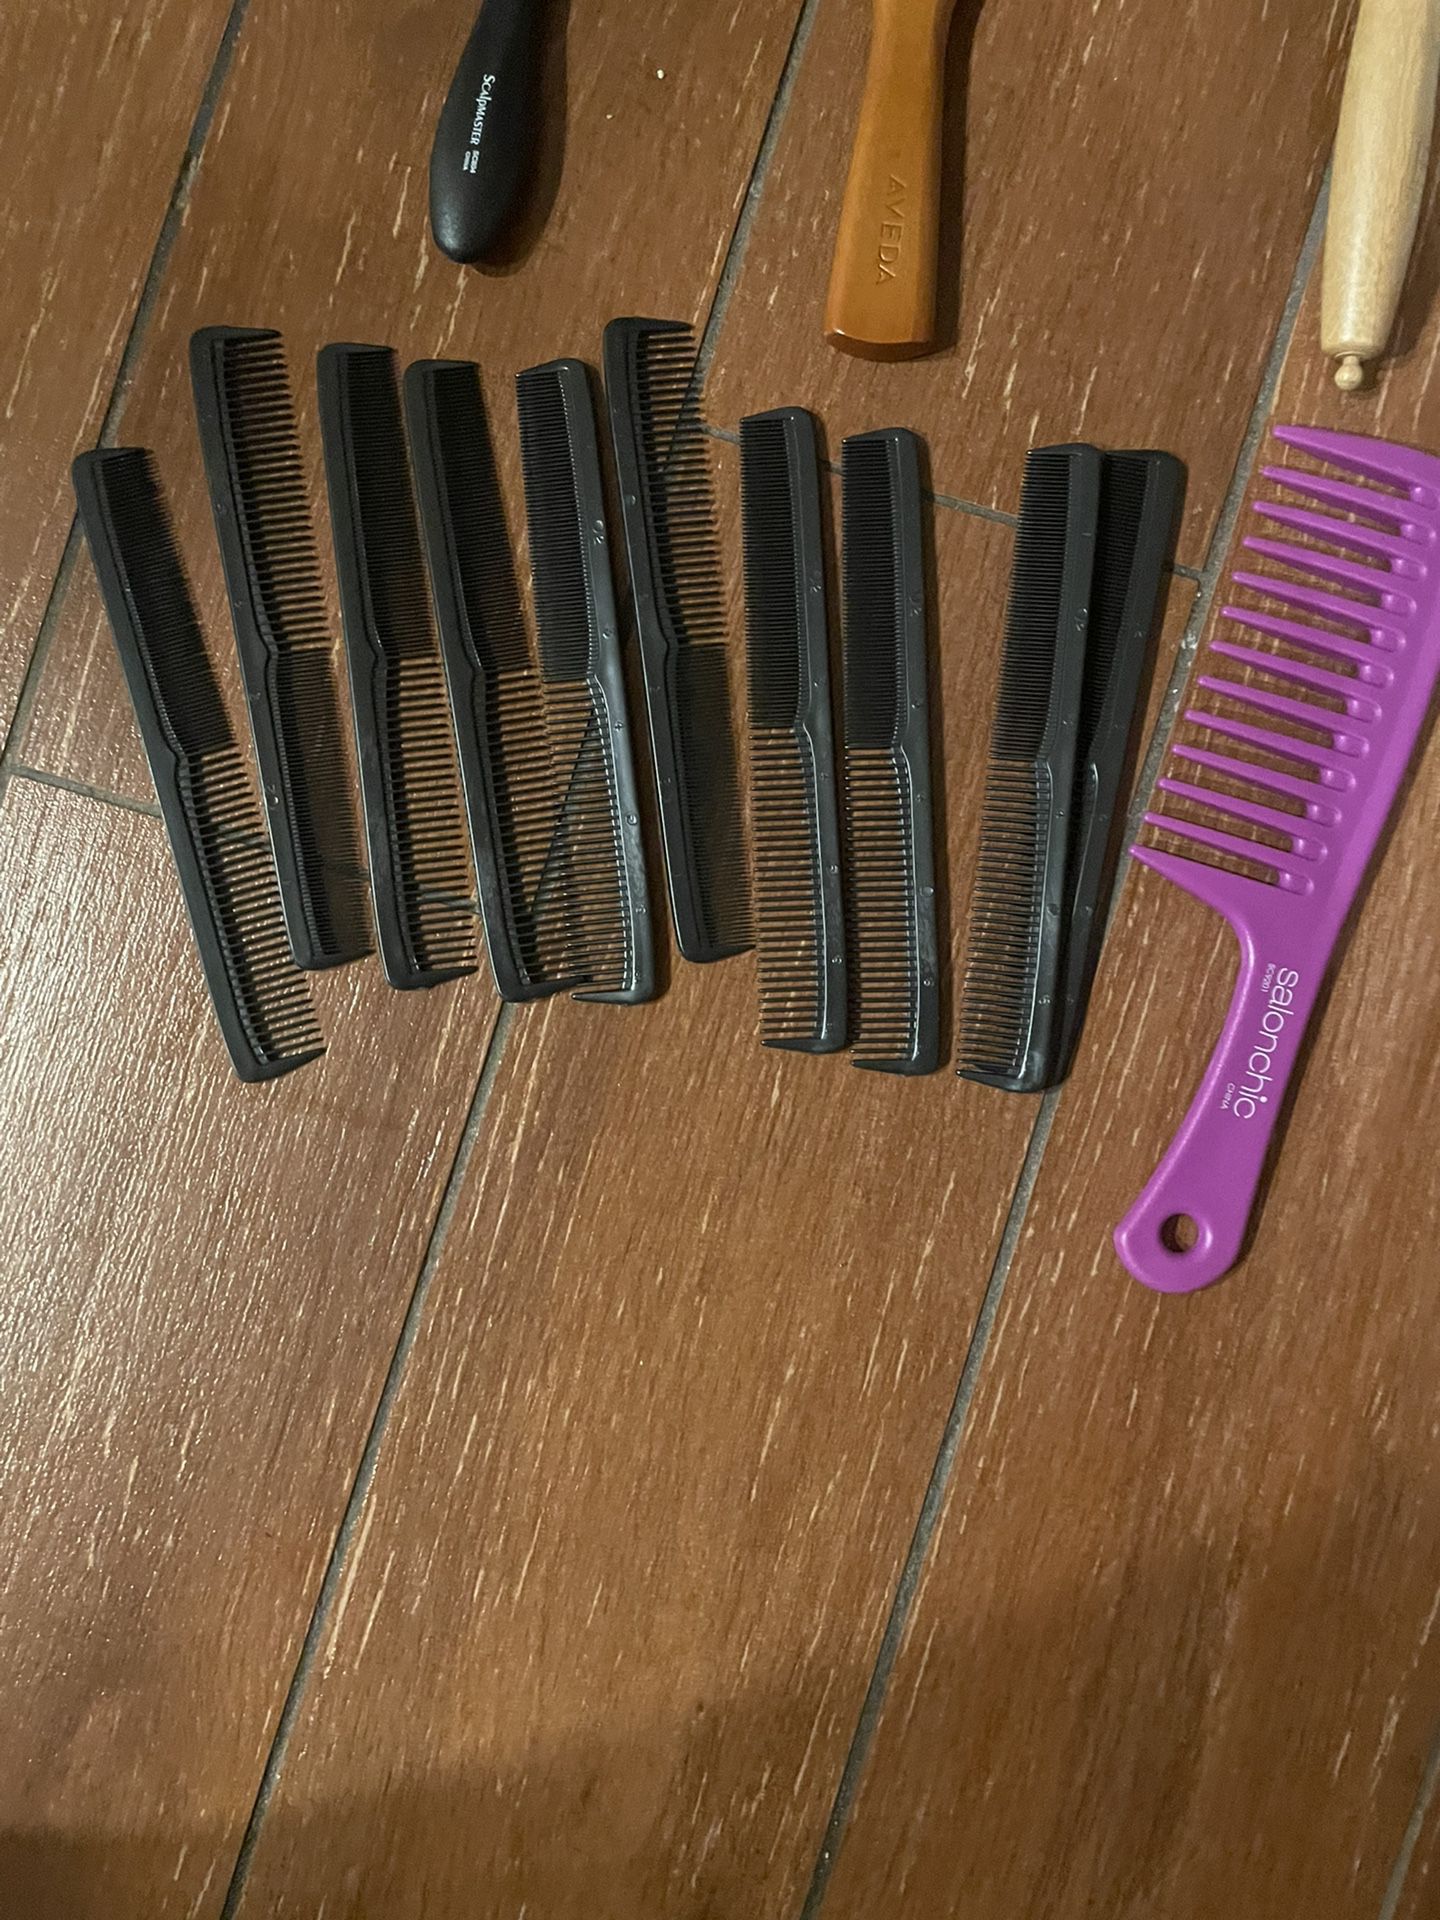 Straightener, Curling Iron, And Hair Brushes/combs